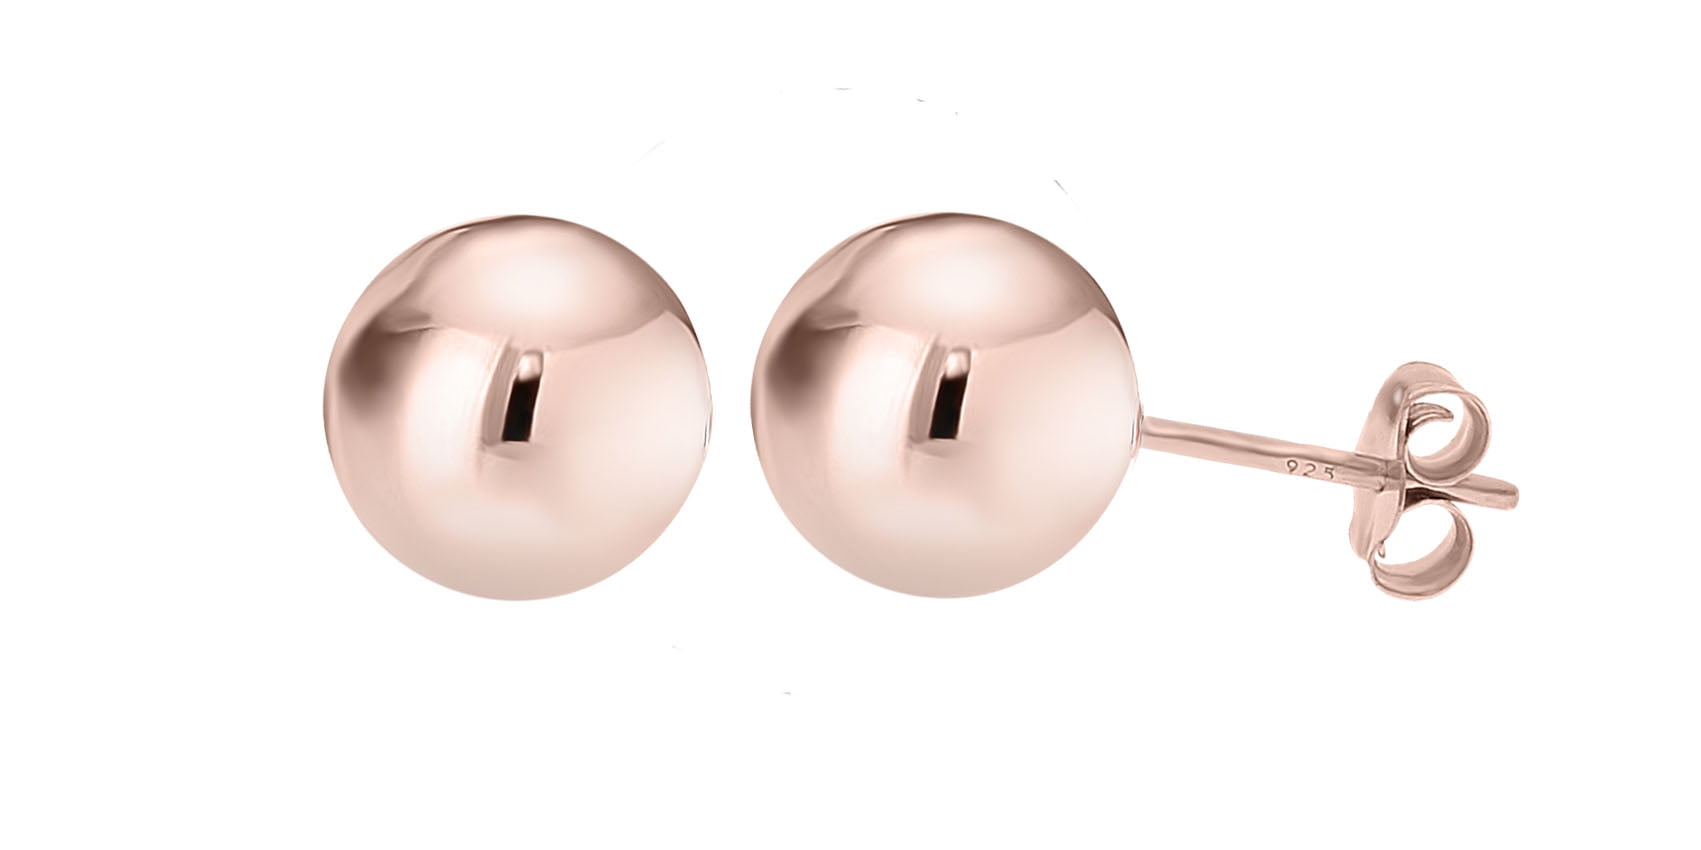 Details about   7mm Rough Surface Flat Disc Earrings 925 Sterling Silver Tiny Studs Push Back 